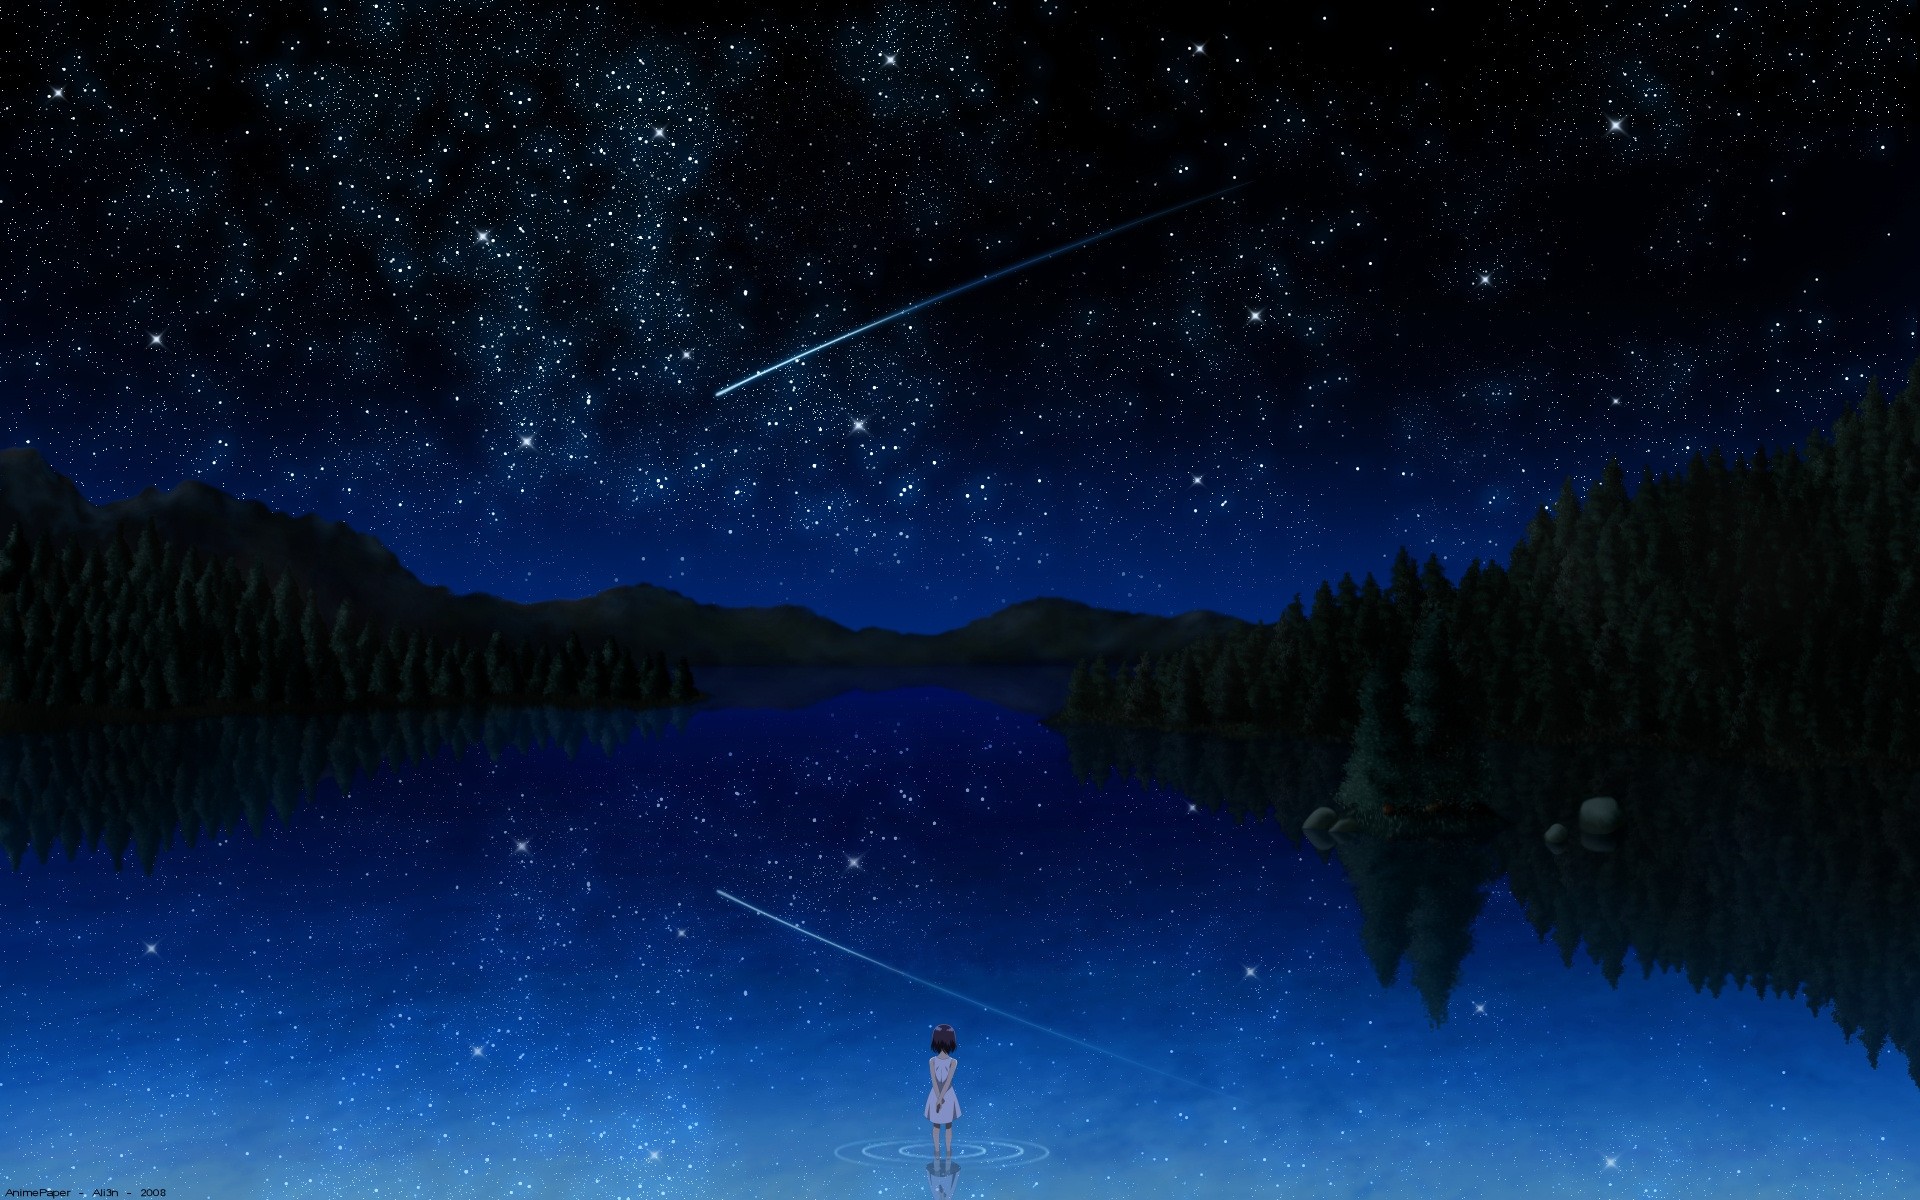 Anime 1920x1200 anime Darker than Black anime girls sky starry night stars standing alone water reflection nature women outdoors outdoors